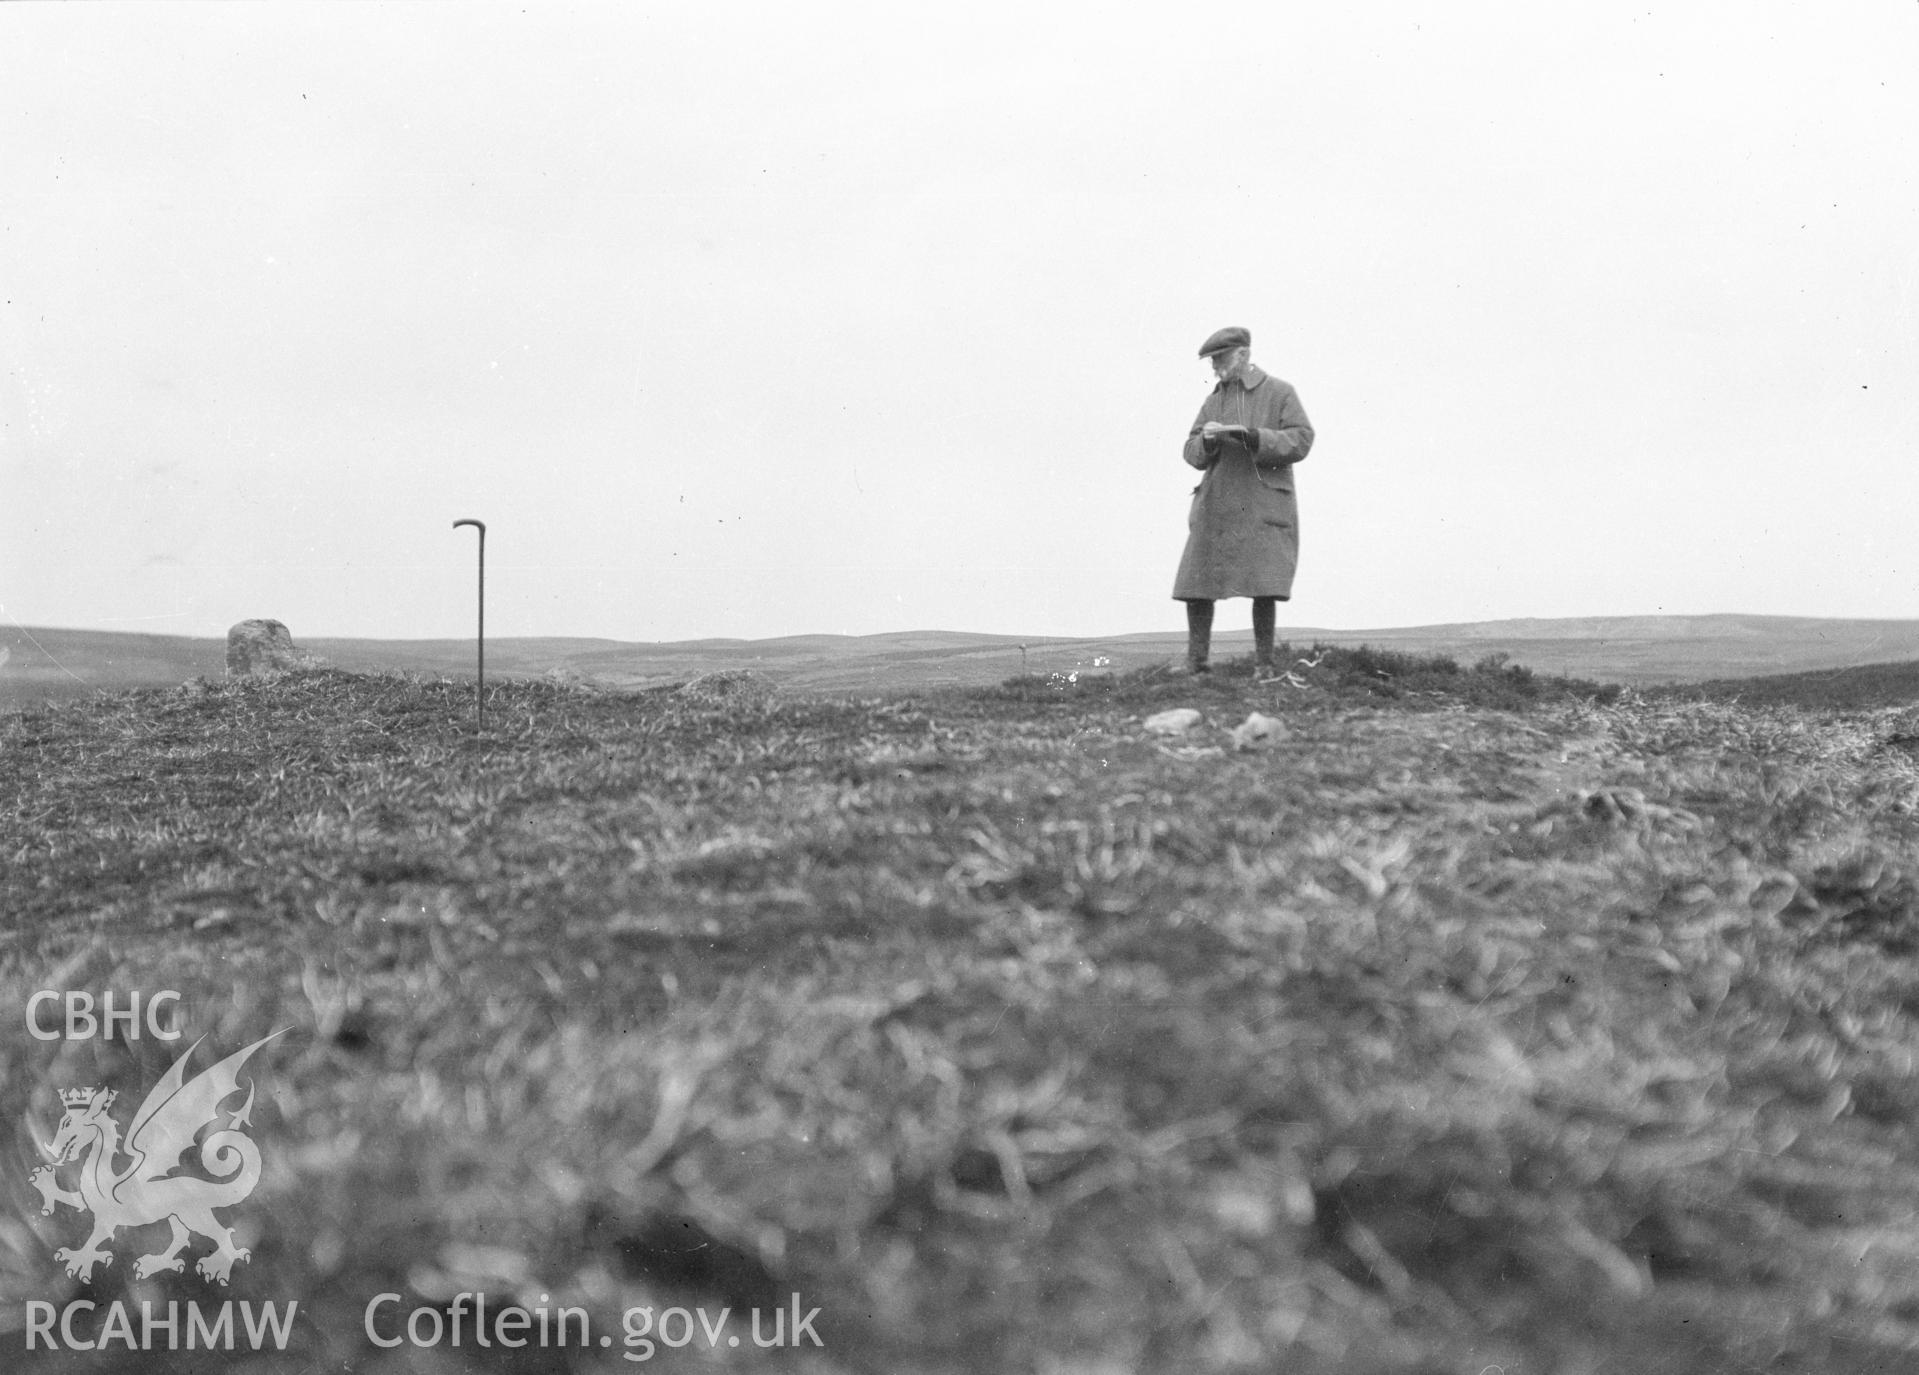 Digital copy of a nitrate negative showing Bryn Beddau round barrows. Back of negative copy dates the photograph to 'July 1930.' From the Cadw Monuments in Care Collection.